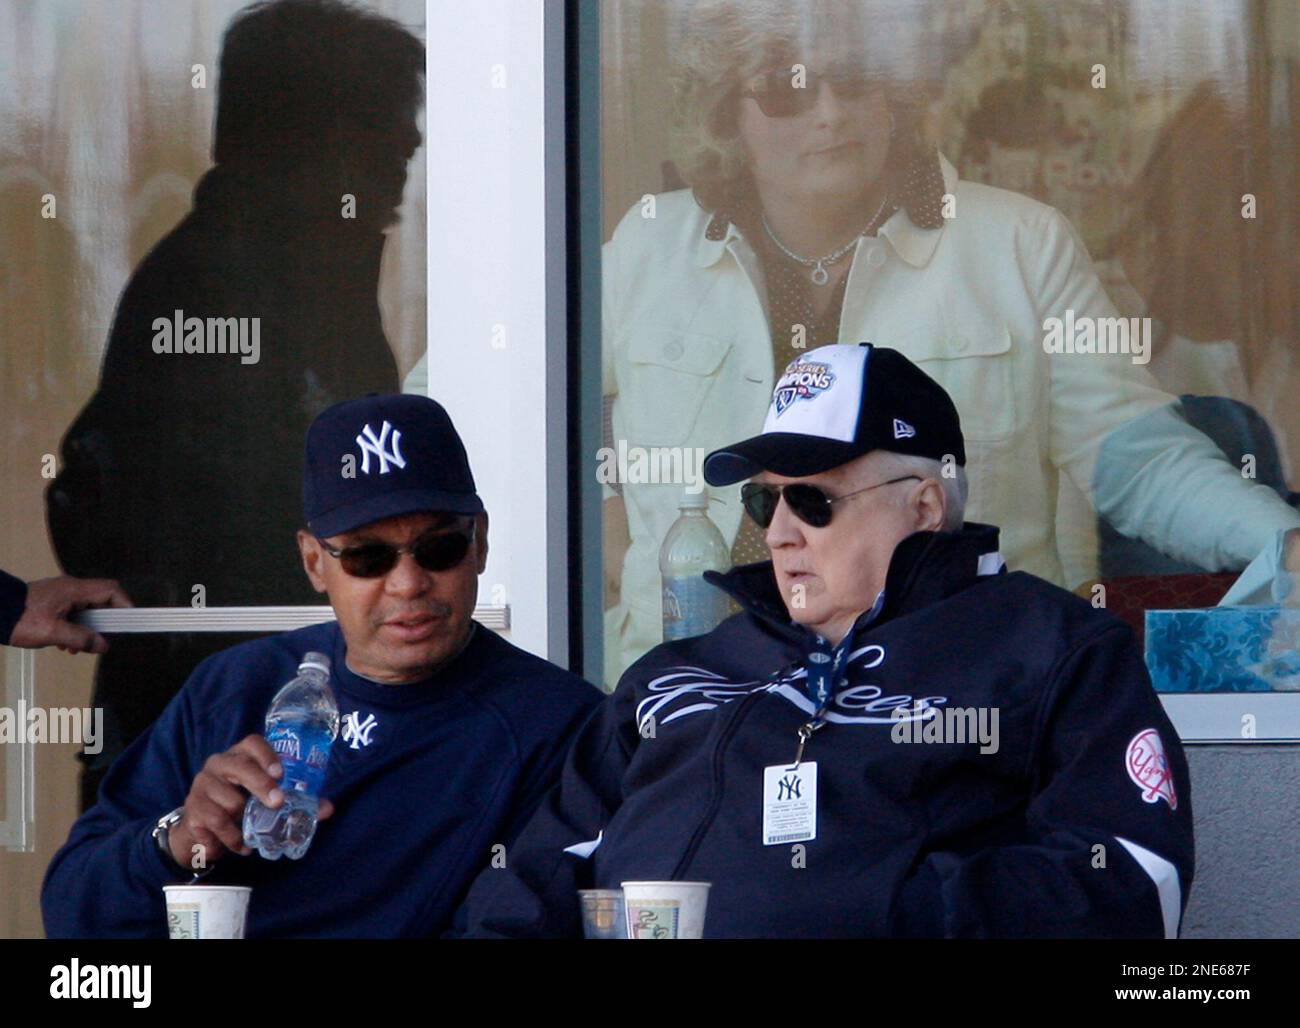 New York Yankees Hall of Famer Reggie Jackson, left, sits with the